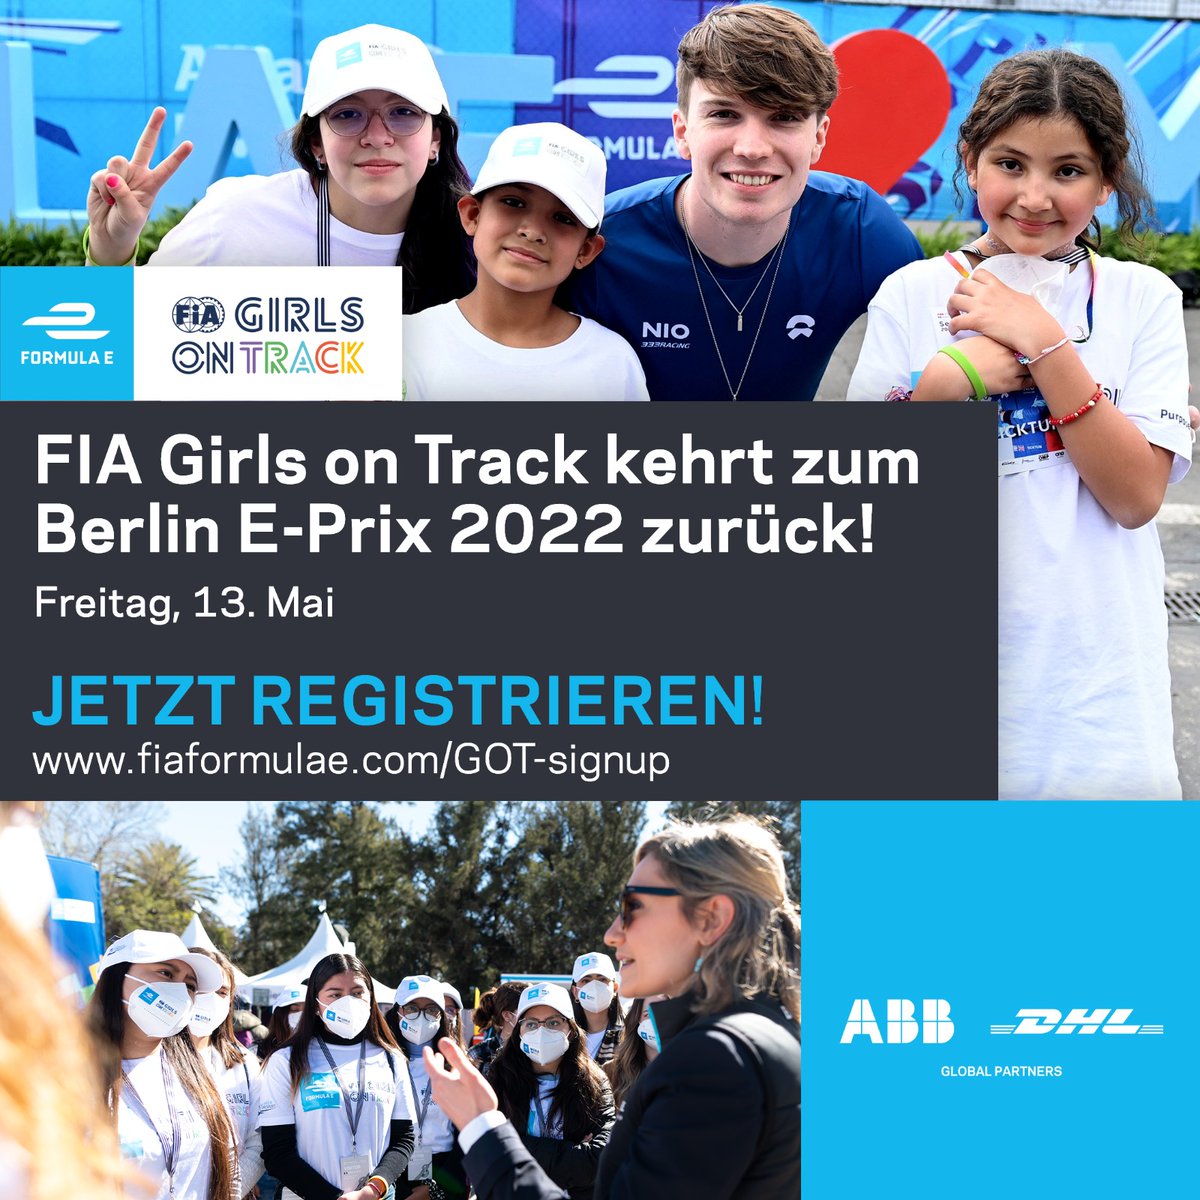 ❗The registrations for the FIA Girls on Track - Berlin are now open ❗

Get the chance to discover the environment of a race weekend through the FIA Girls on Track initiative in Berlin, on Friday 13th of May ! 

Sign up through the link in our bio ✍️

#GirlsOnTrackFE